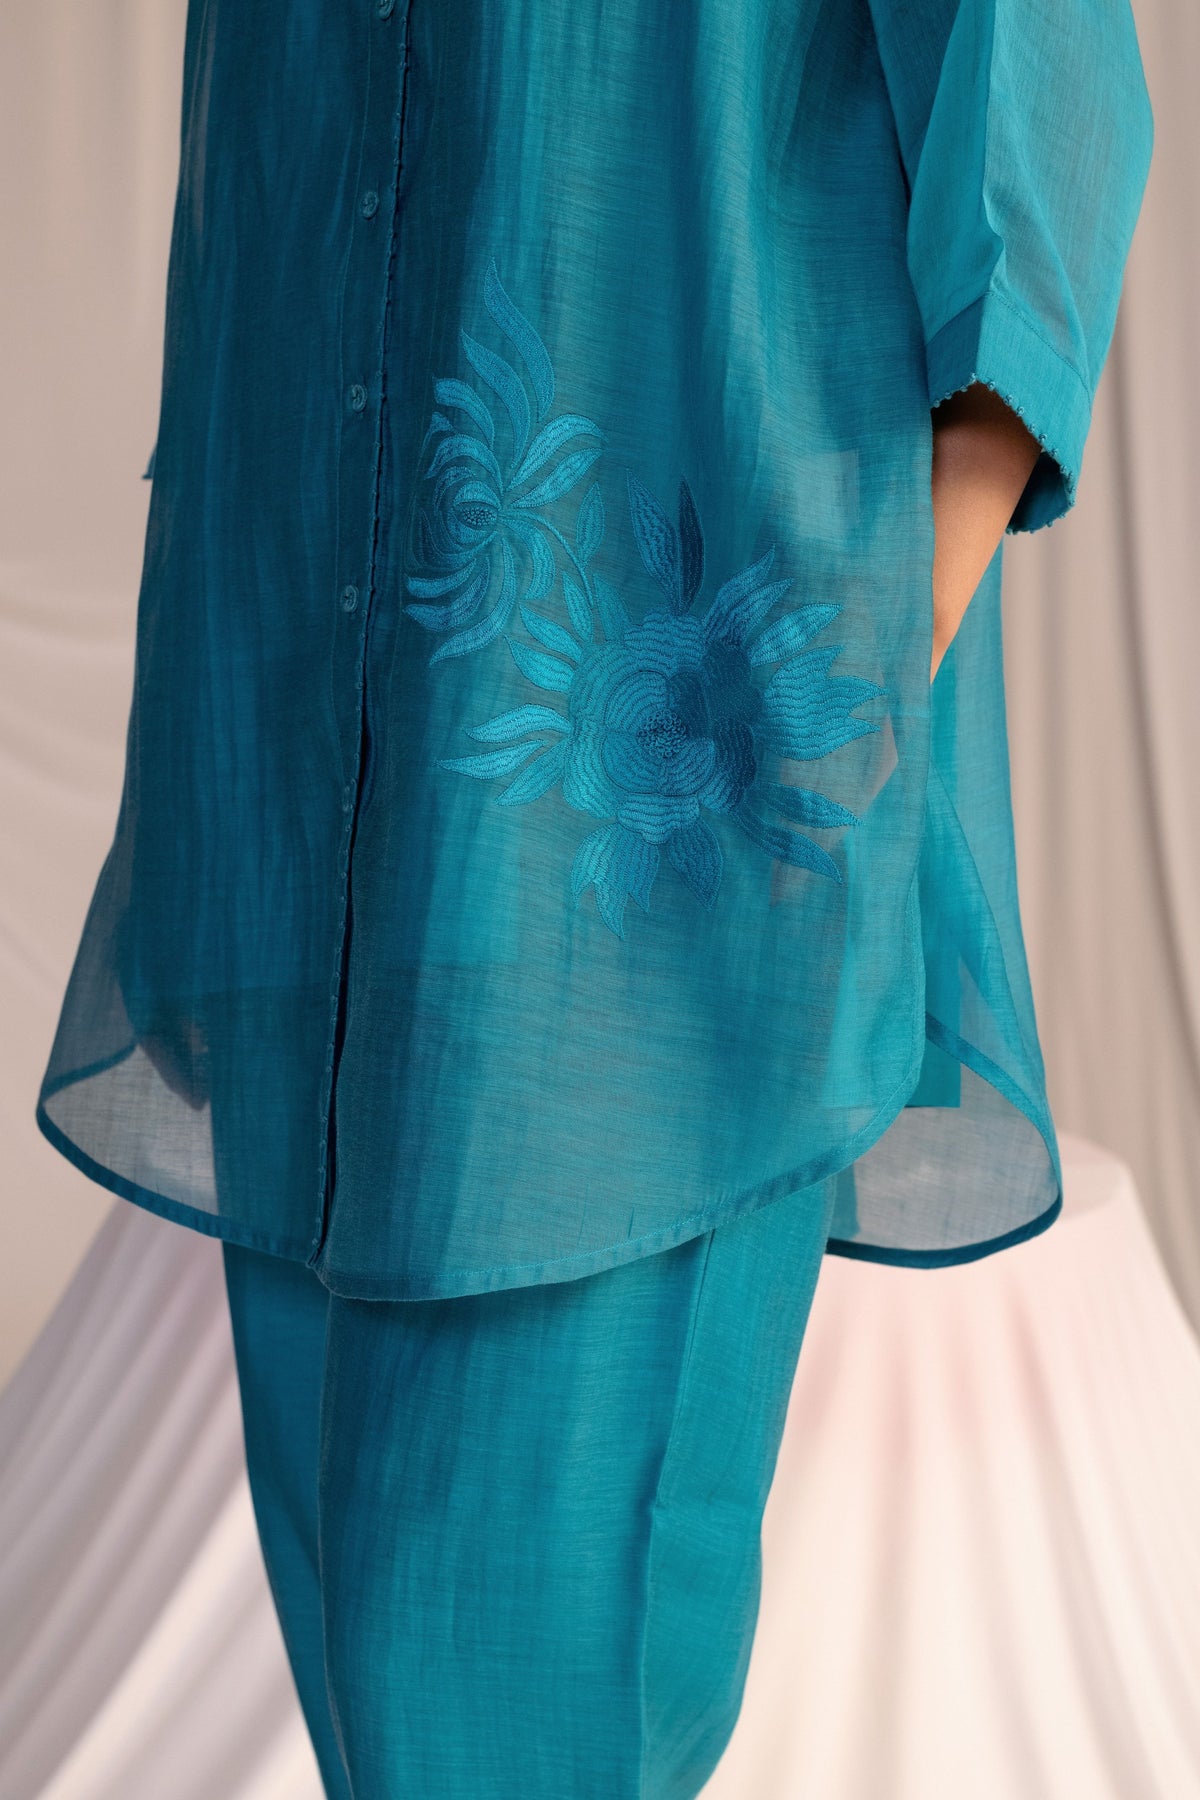 Turquoise Embroidered Tunic Set